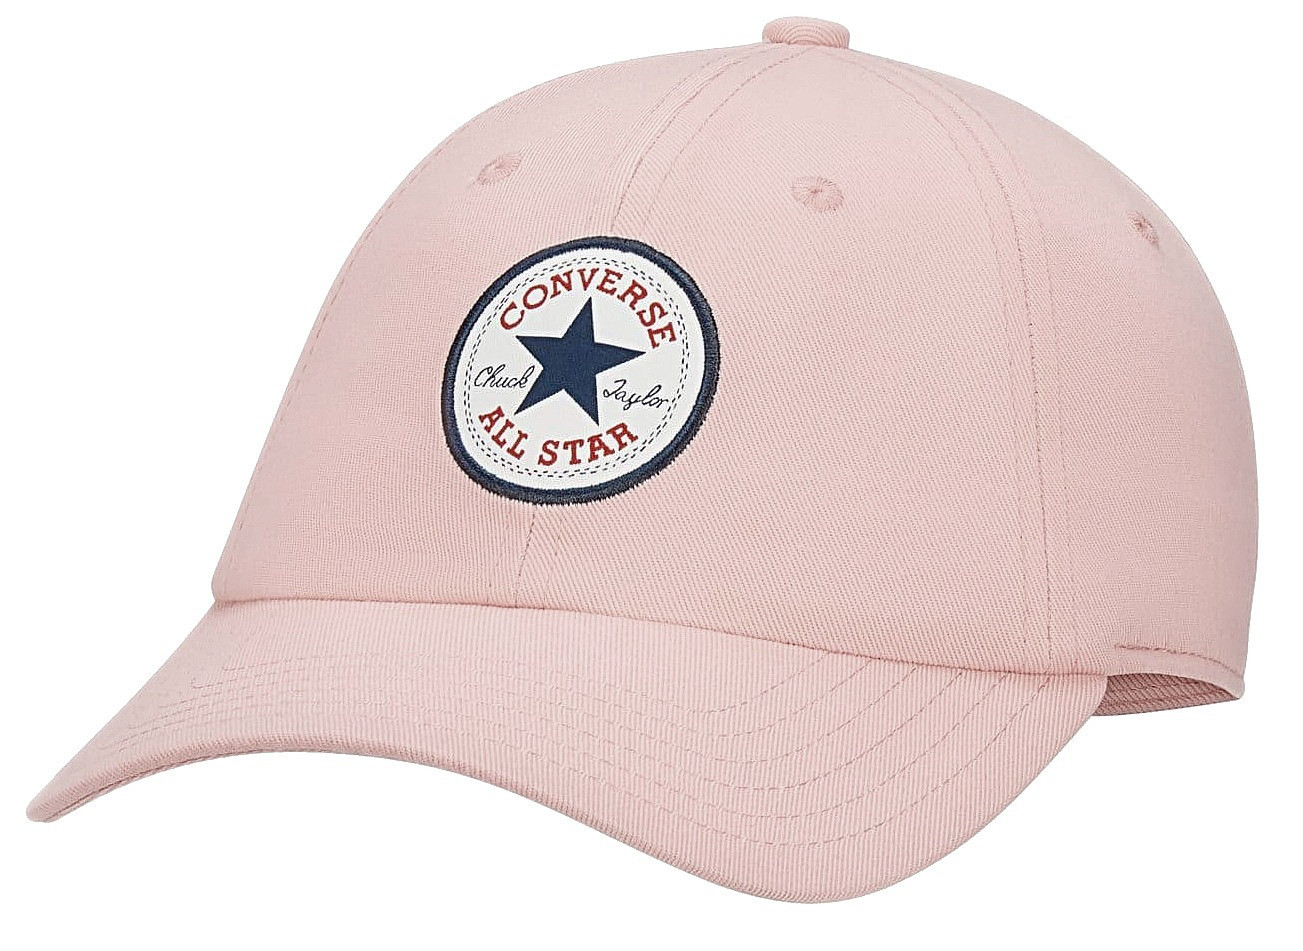 CONVERSE ALL STAR PATCH BASEBALL HAT Os